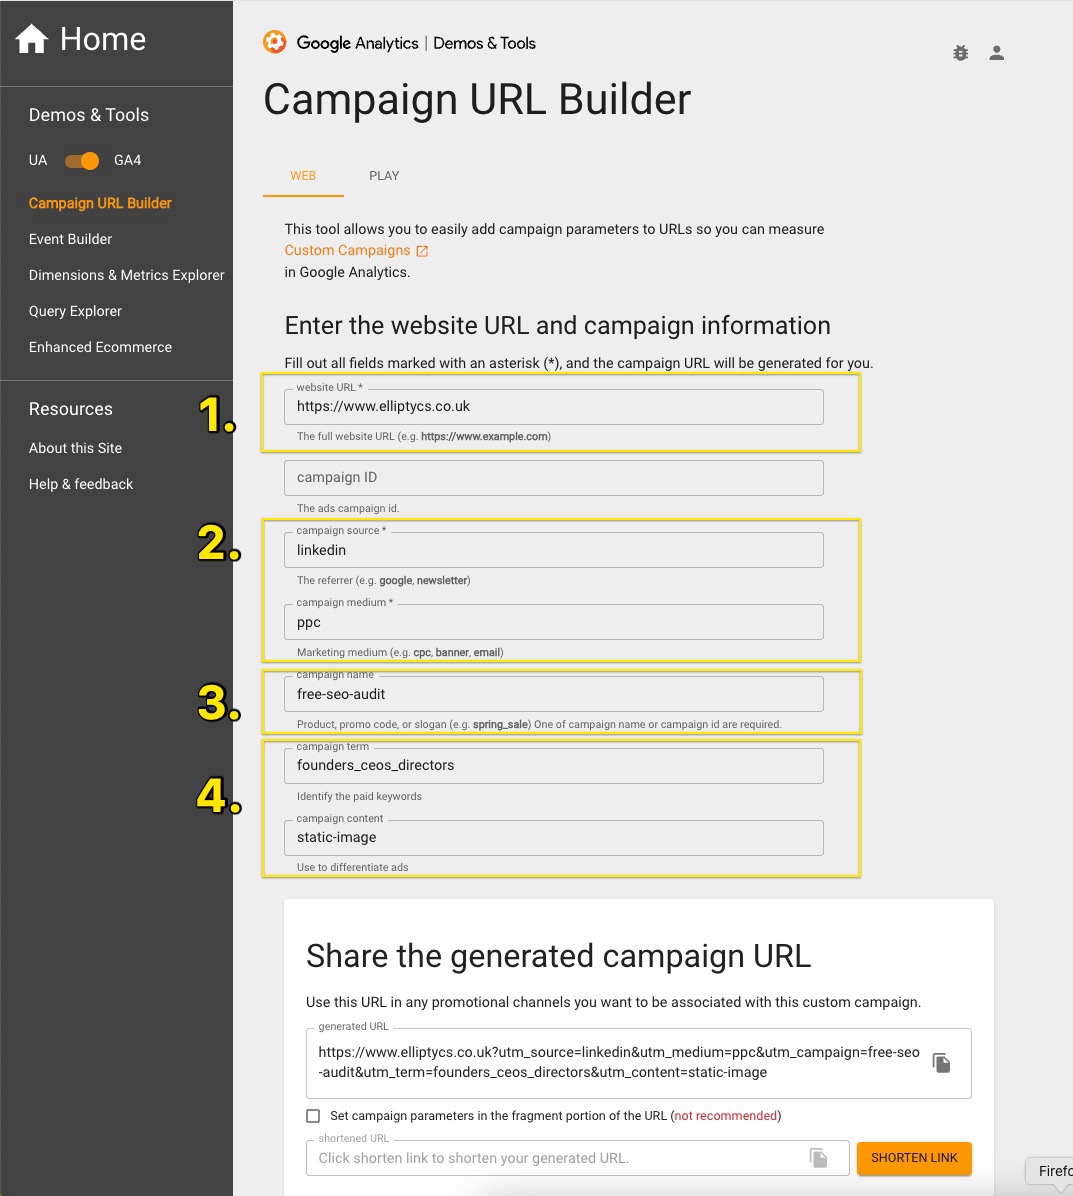 Step by Step Guide to Creating UTM Links